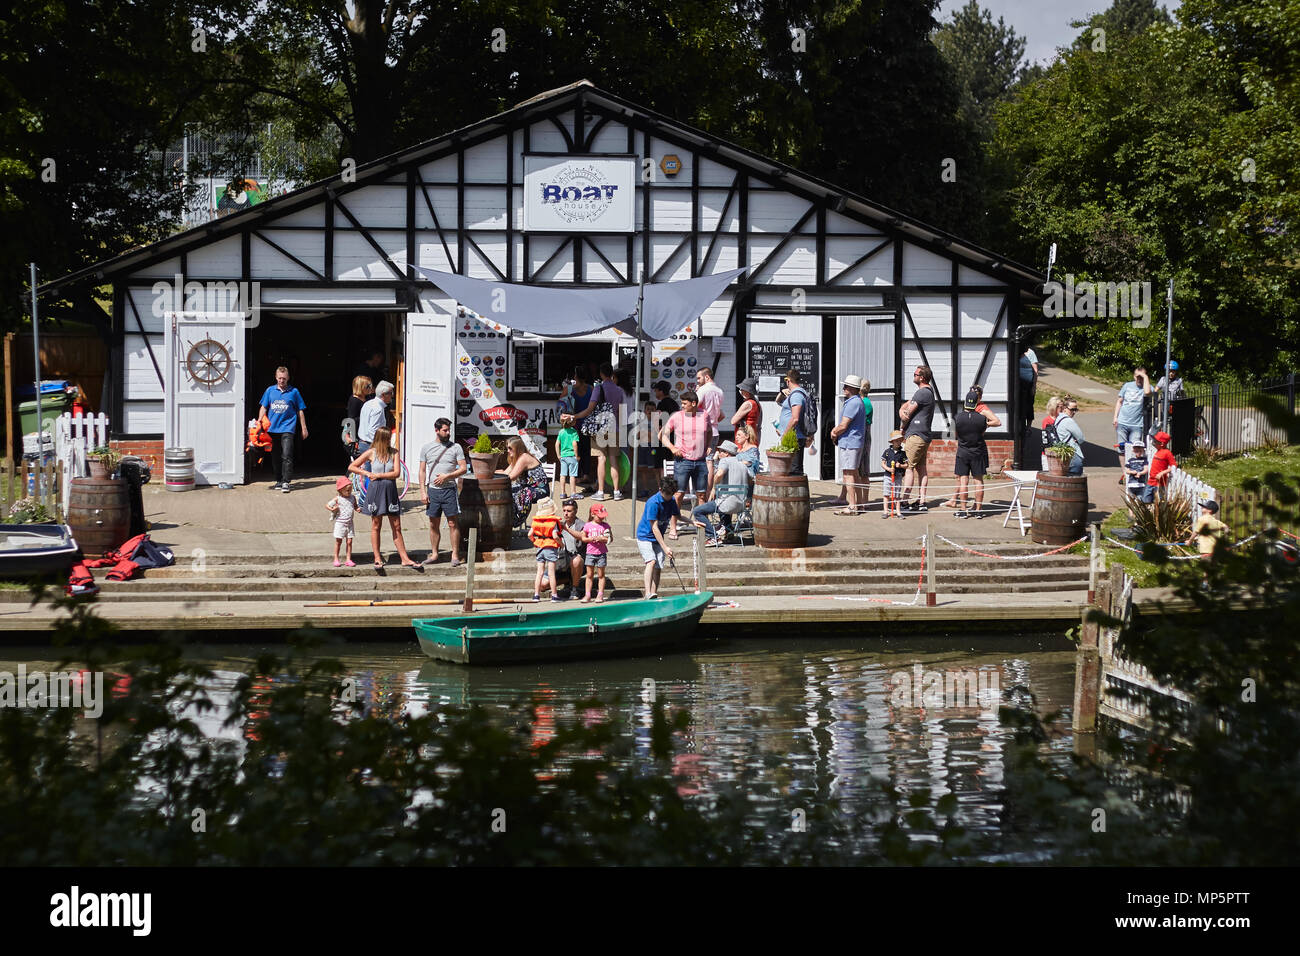 Families on a boat house quay on a sunny day. Pittville Park, Cheltenham, Gloucestershire. Stock Photo